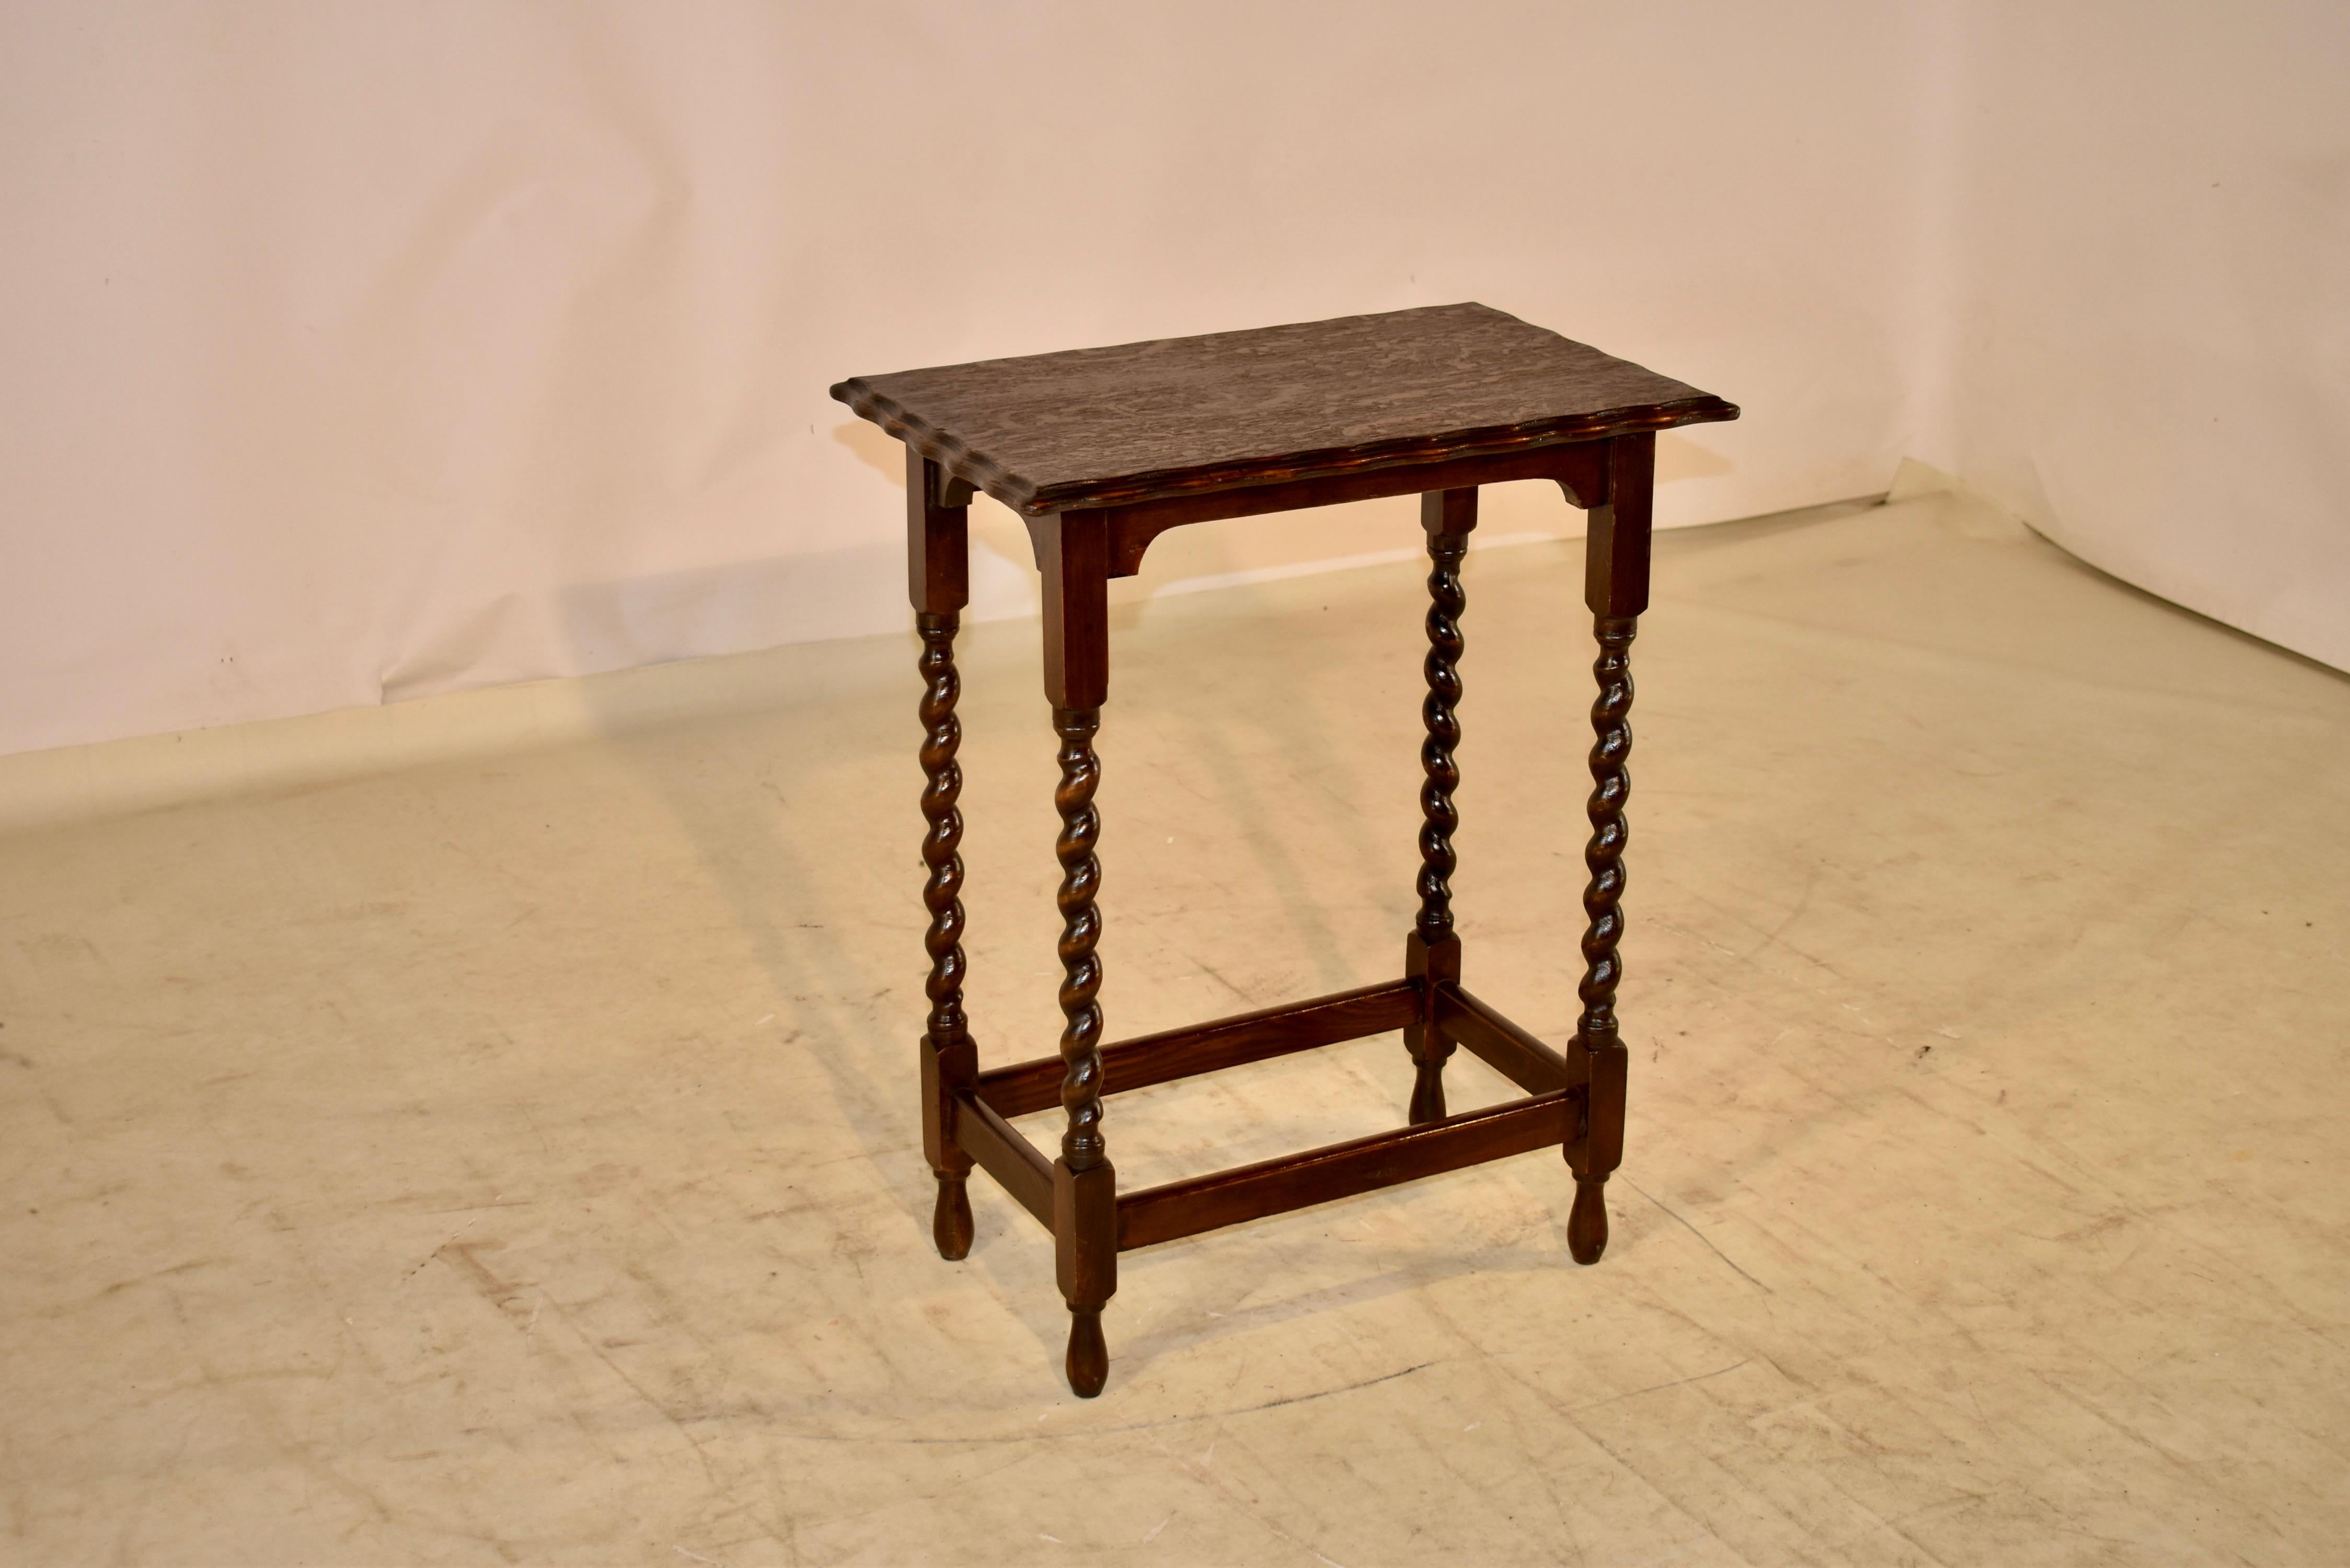 Circa 1900 English oak side table with a scalloped and beveled edge around the top, following down to a hand shaped apron and supported on hand turned barley twist legs. The legs are joined by simple stretchers and the table is raised on hand turned